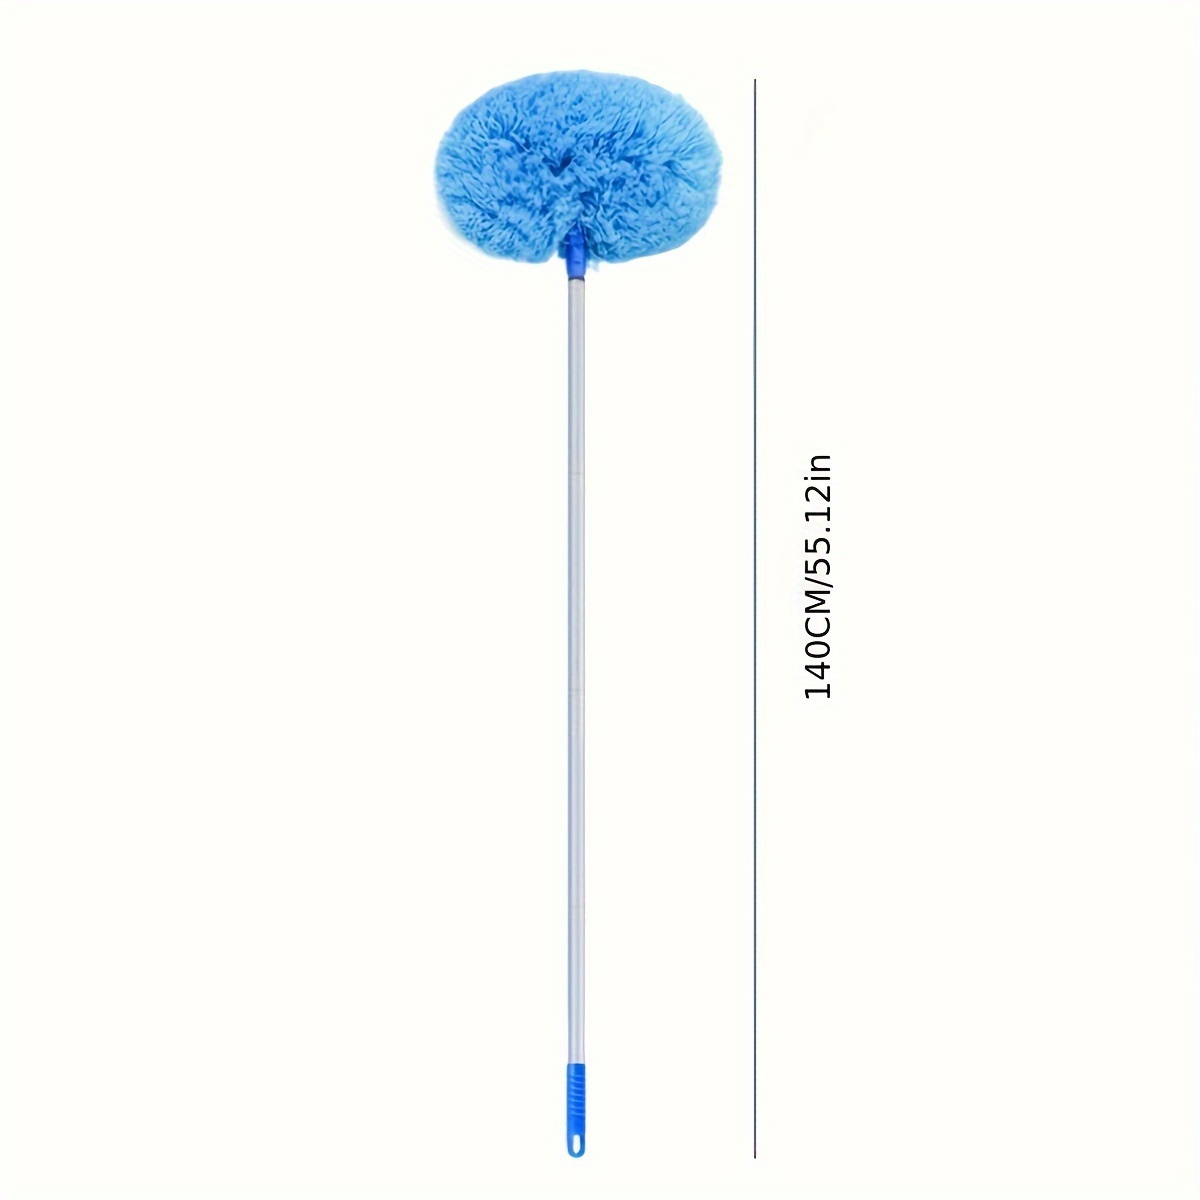 1pc extendable duster with multiple components plastic broom handles for ceiling fan high ceilings furniture and car cleaning washable reusable microfiber dust removal brush